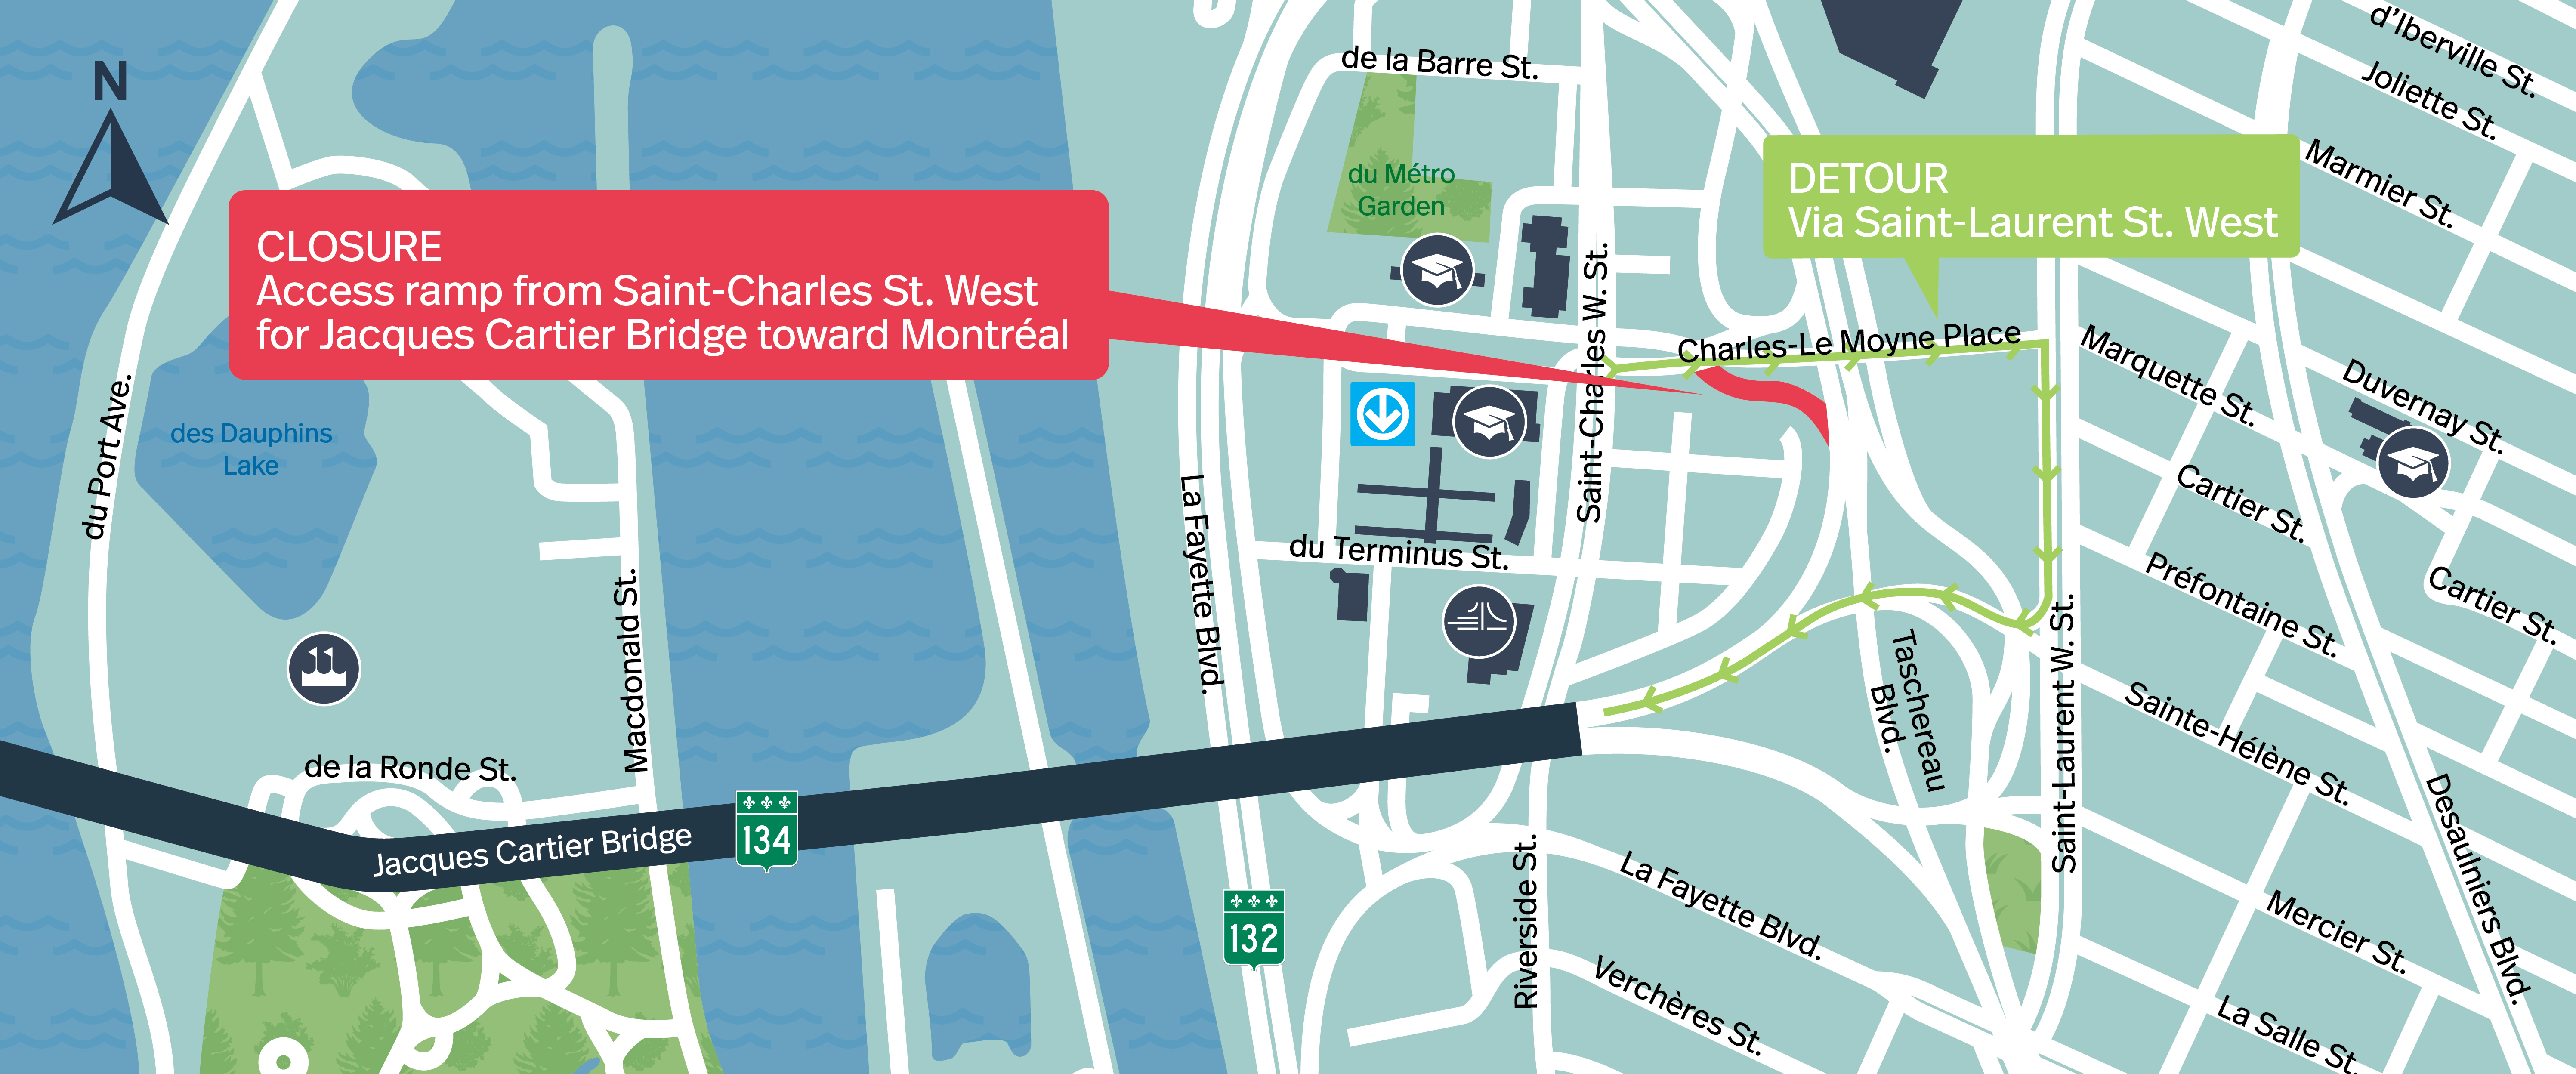 Jacques Cartier Bridge | Complete overnight closure of the Place Charles-Le Moyne access ramp, on November 10